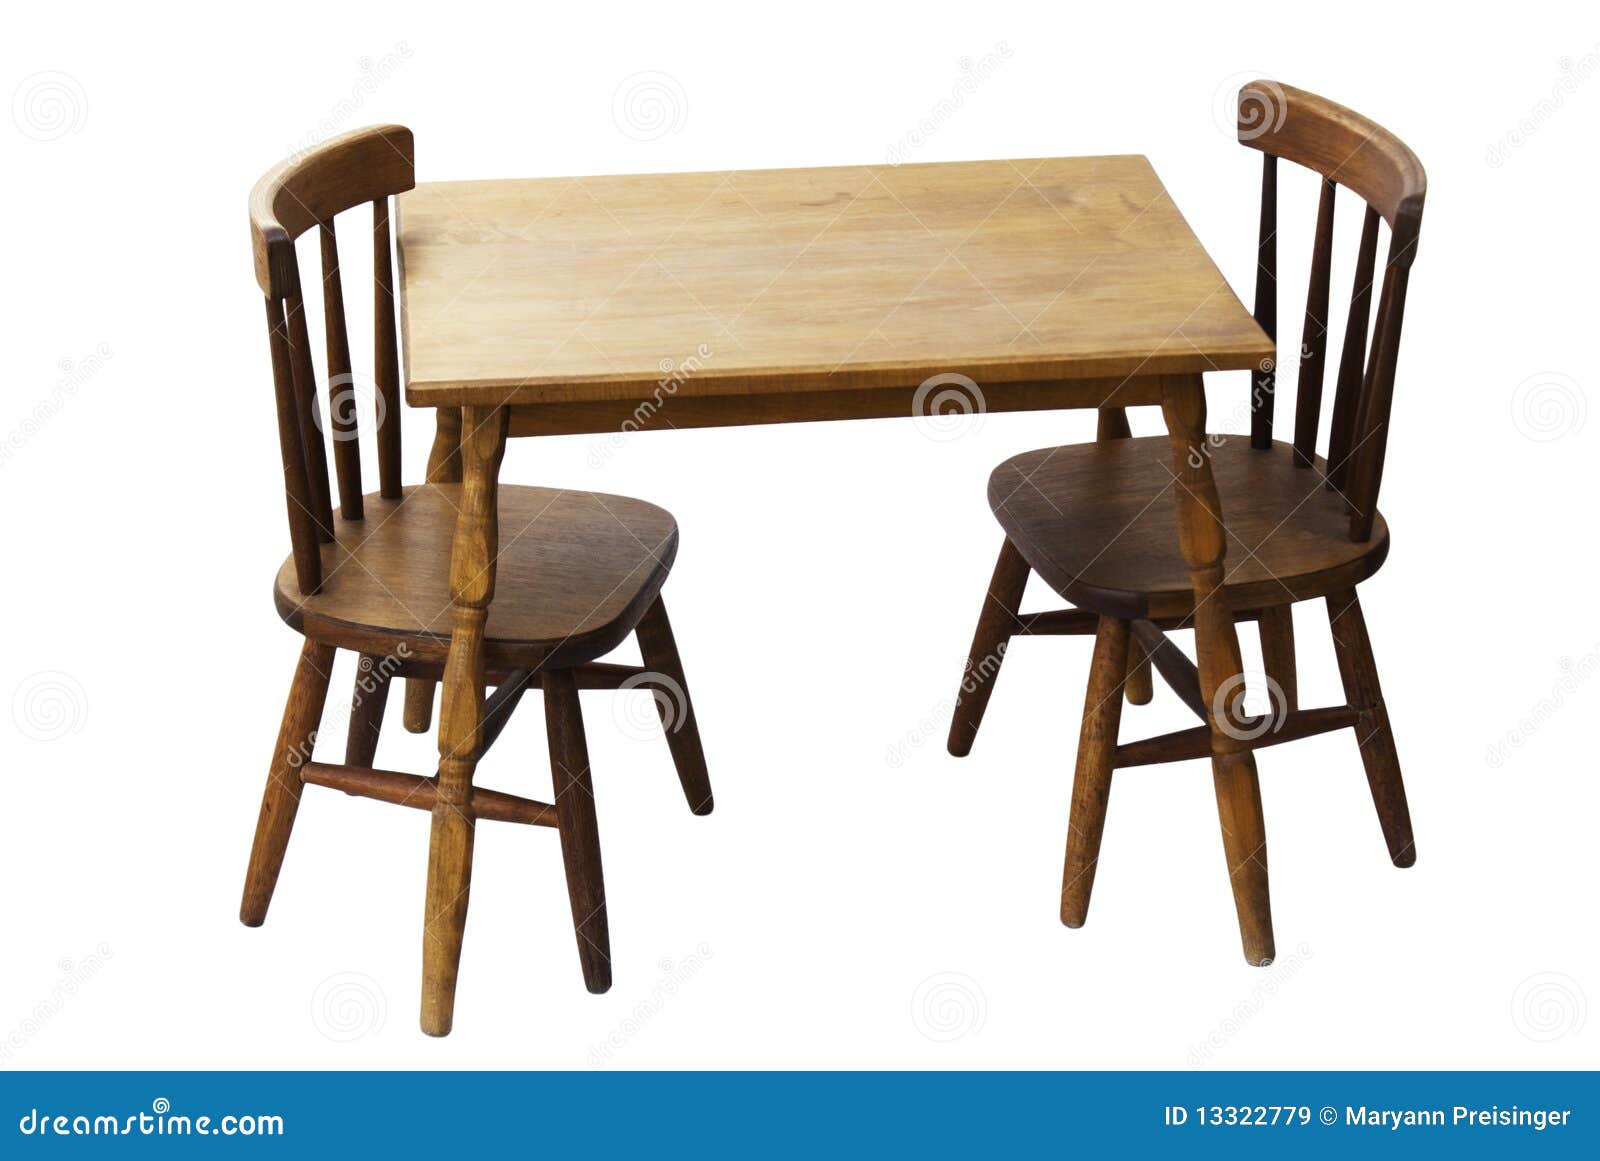 Children's Child Wood Table And Chairs Isolated Royalty Free Stock ...